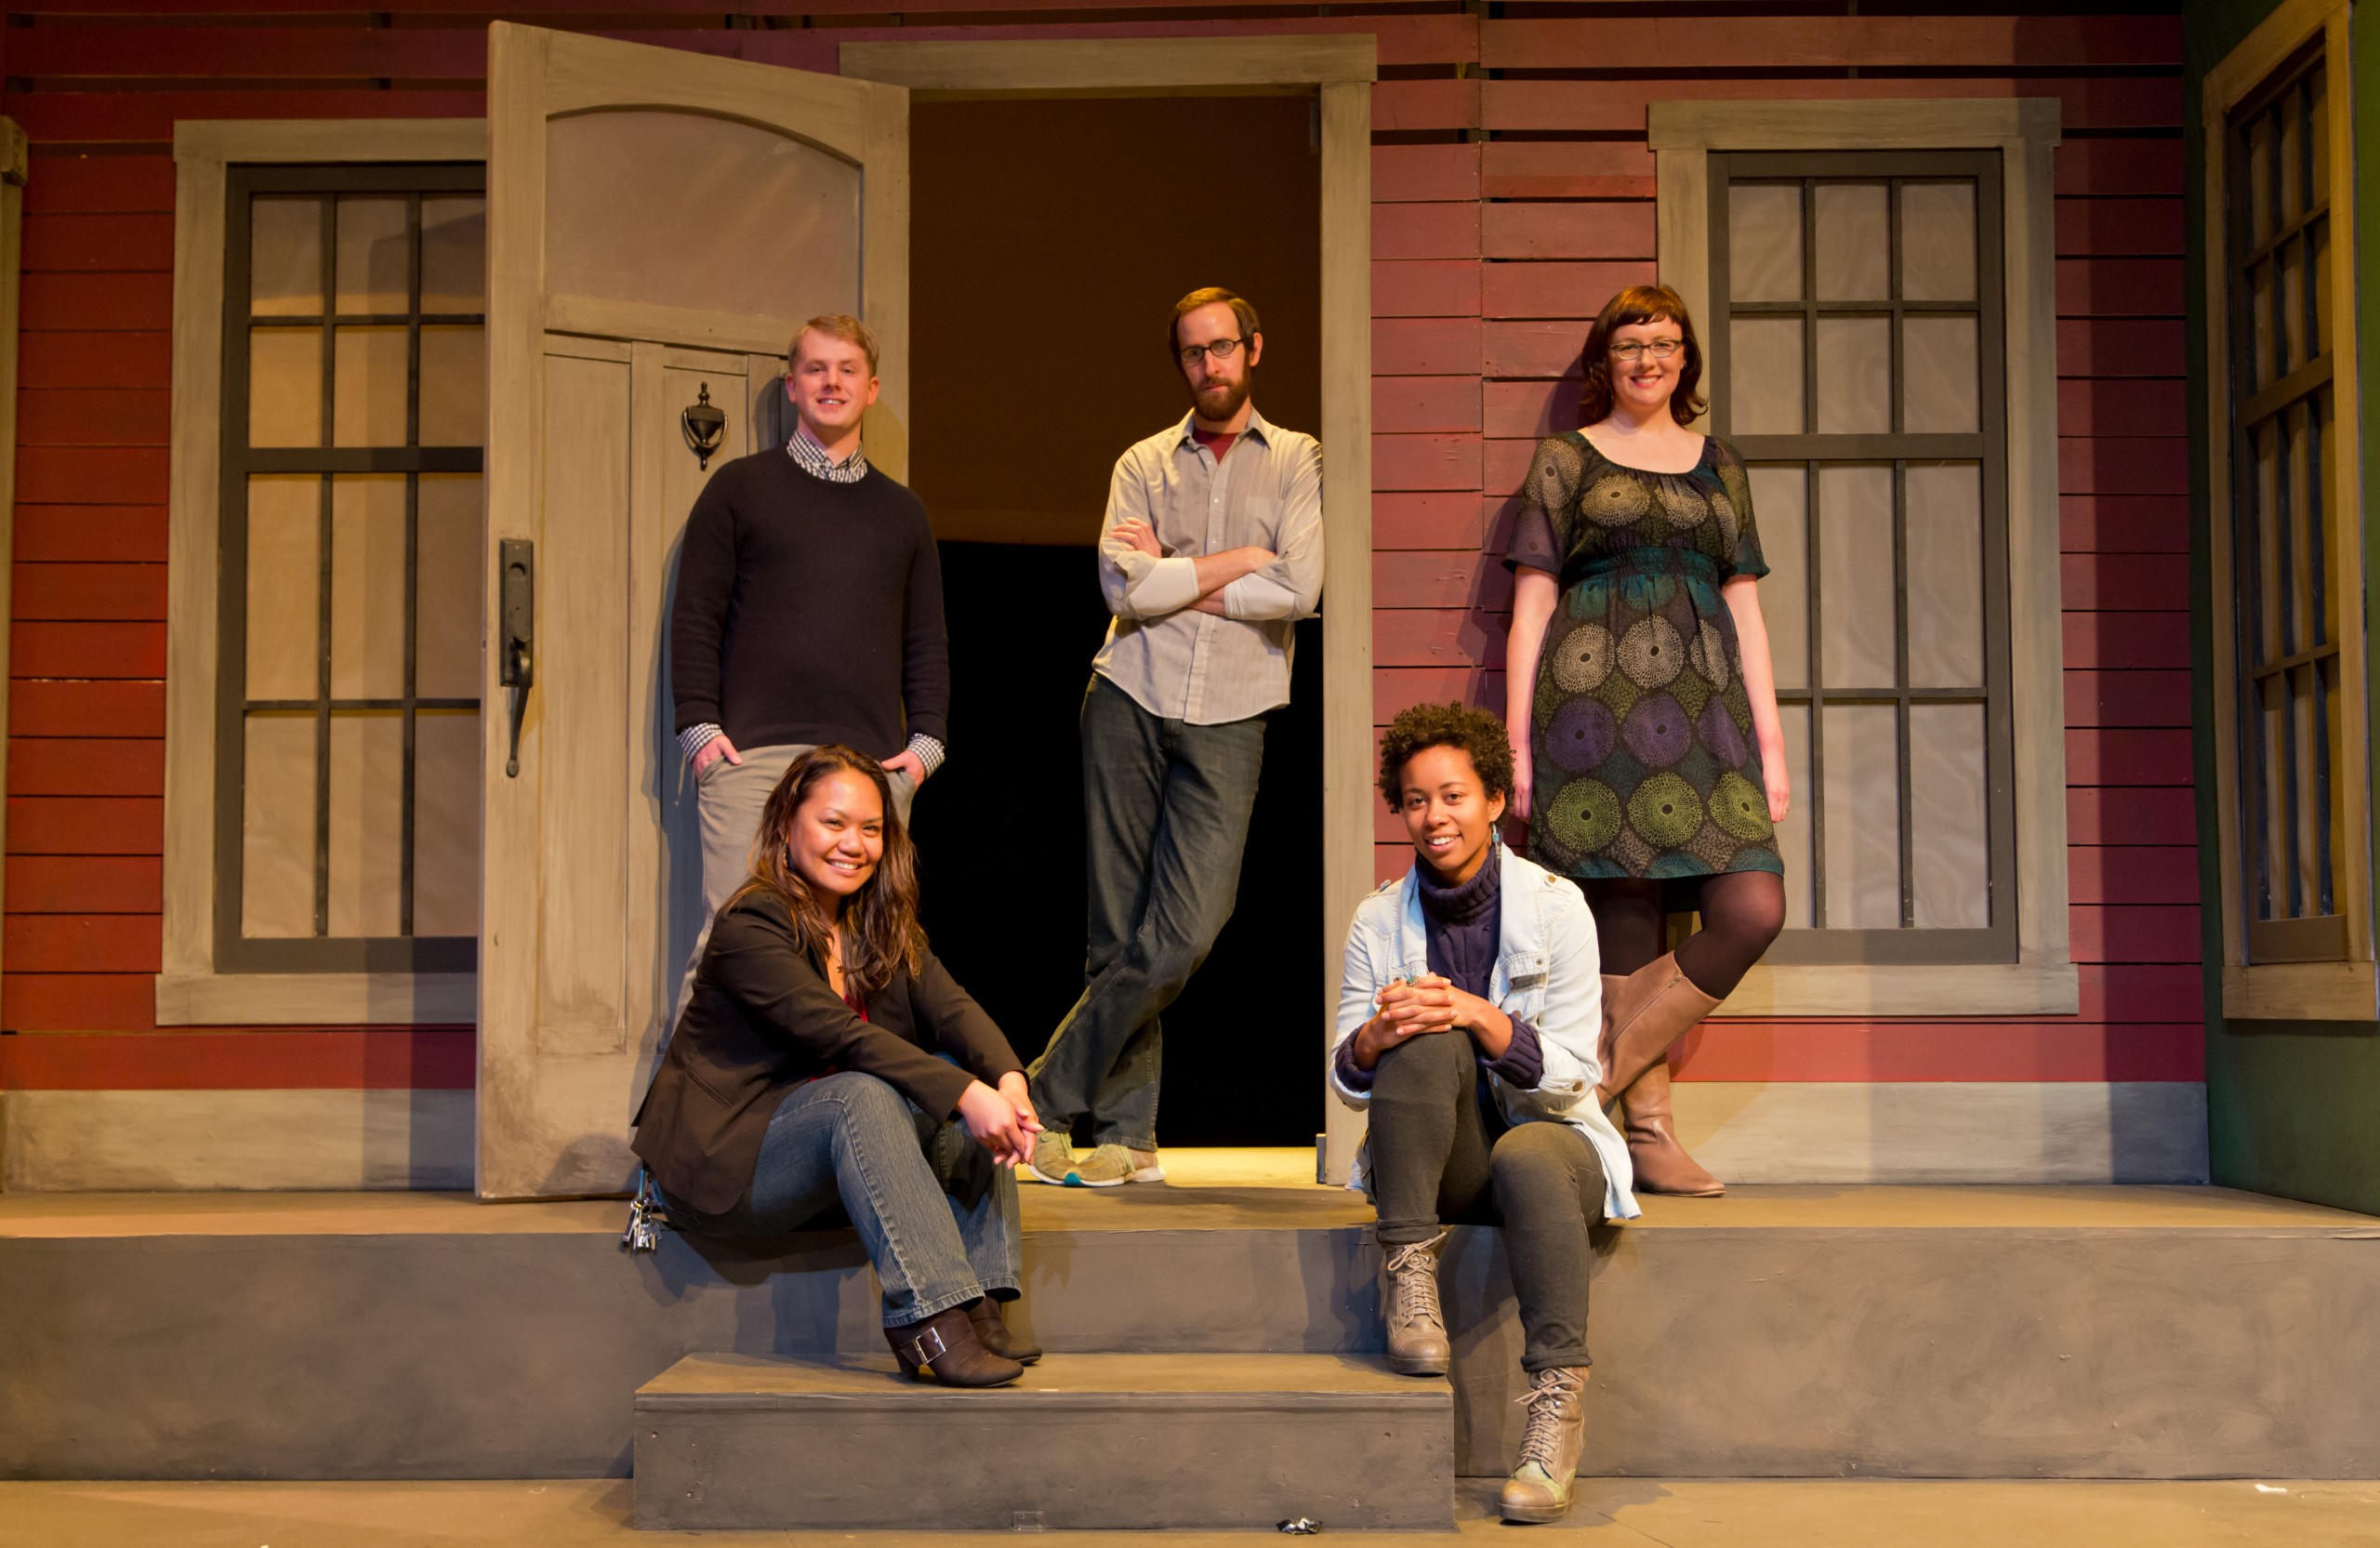 Five PLU graduates work at Tacoma’s Broadway Center for the Performing Arts. Bottom row, from left: Leilani Balais ’99 and April Nyquist ’09. Top row, from left: Jared Wigert ’07, Adam Utley ’04 and Mariesa Bus ’06. Utley will perform Feb. 28 at TEDxTacoma. (Photo: John Froschauer / PLU)